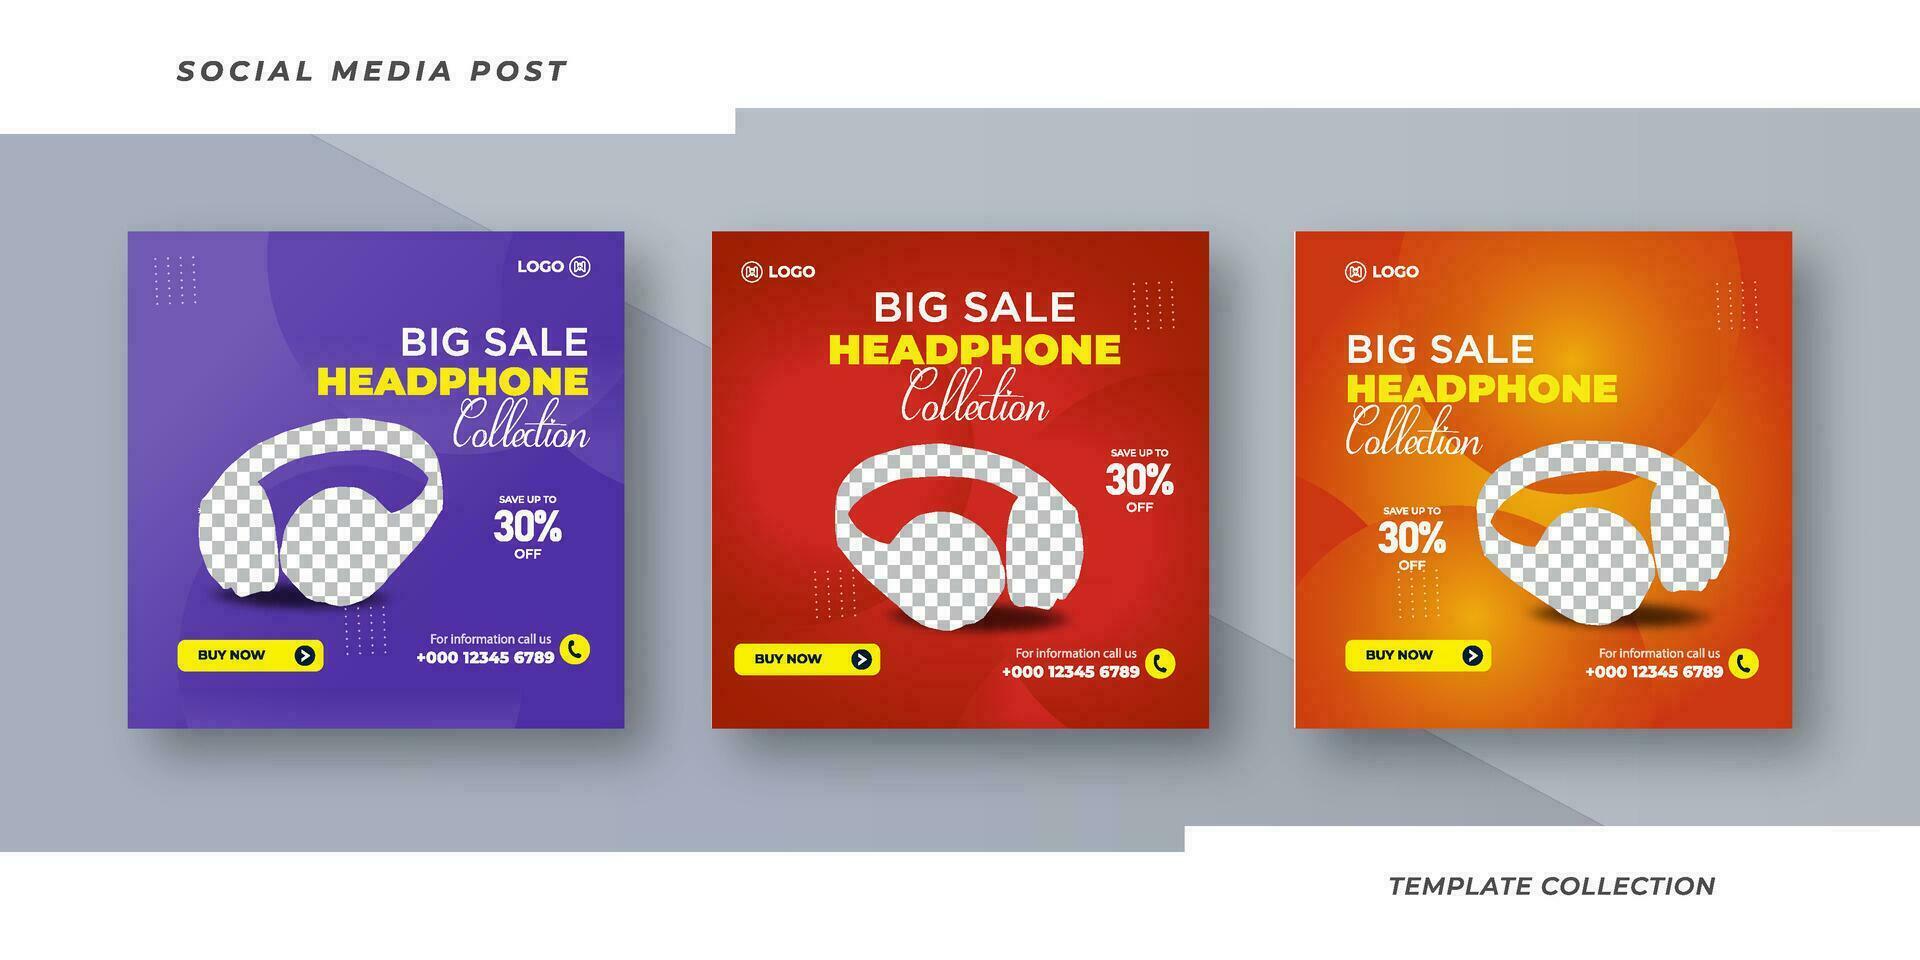 Big sale Headphone Collection Social Media Post for Online Marketing Promotion Banner, Story Pro Vector